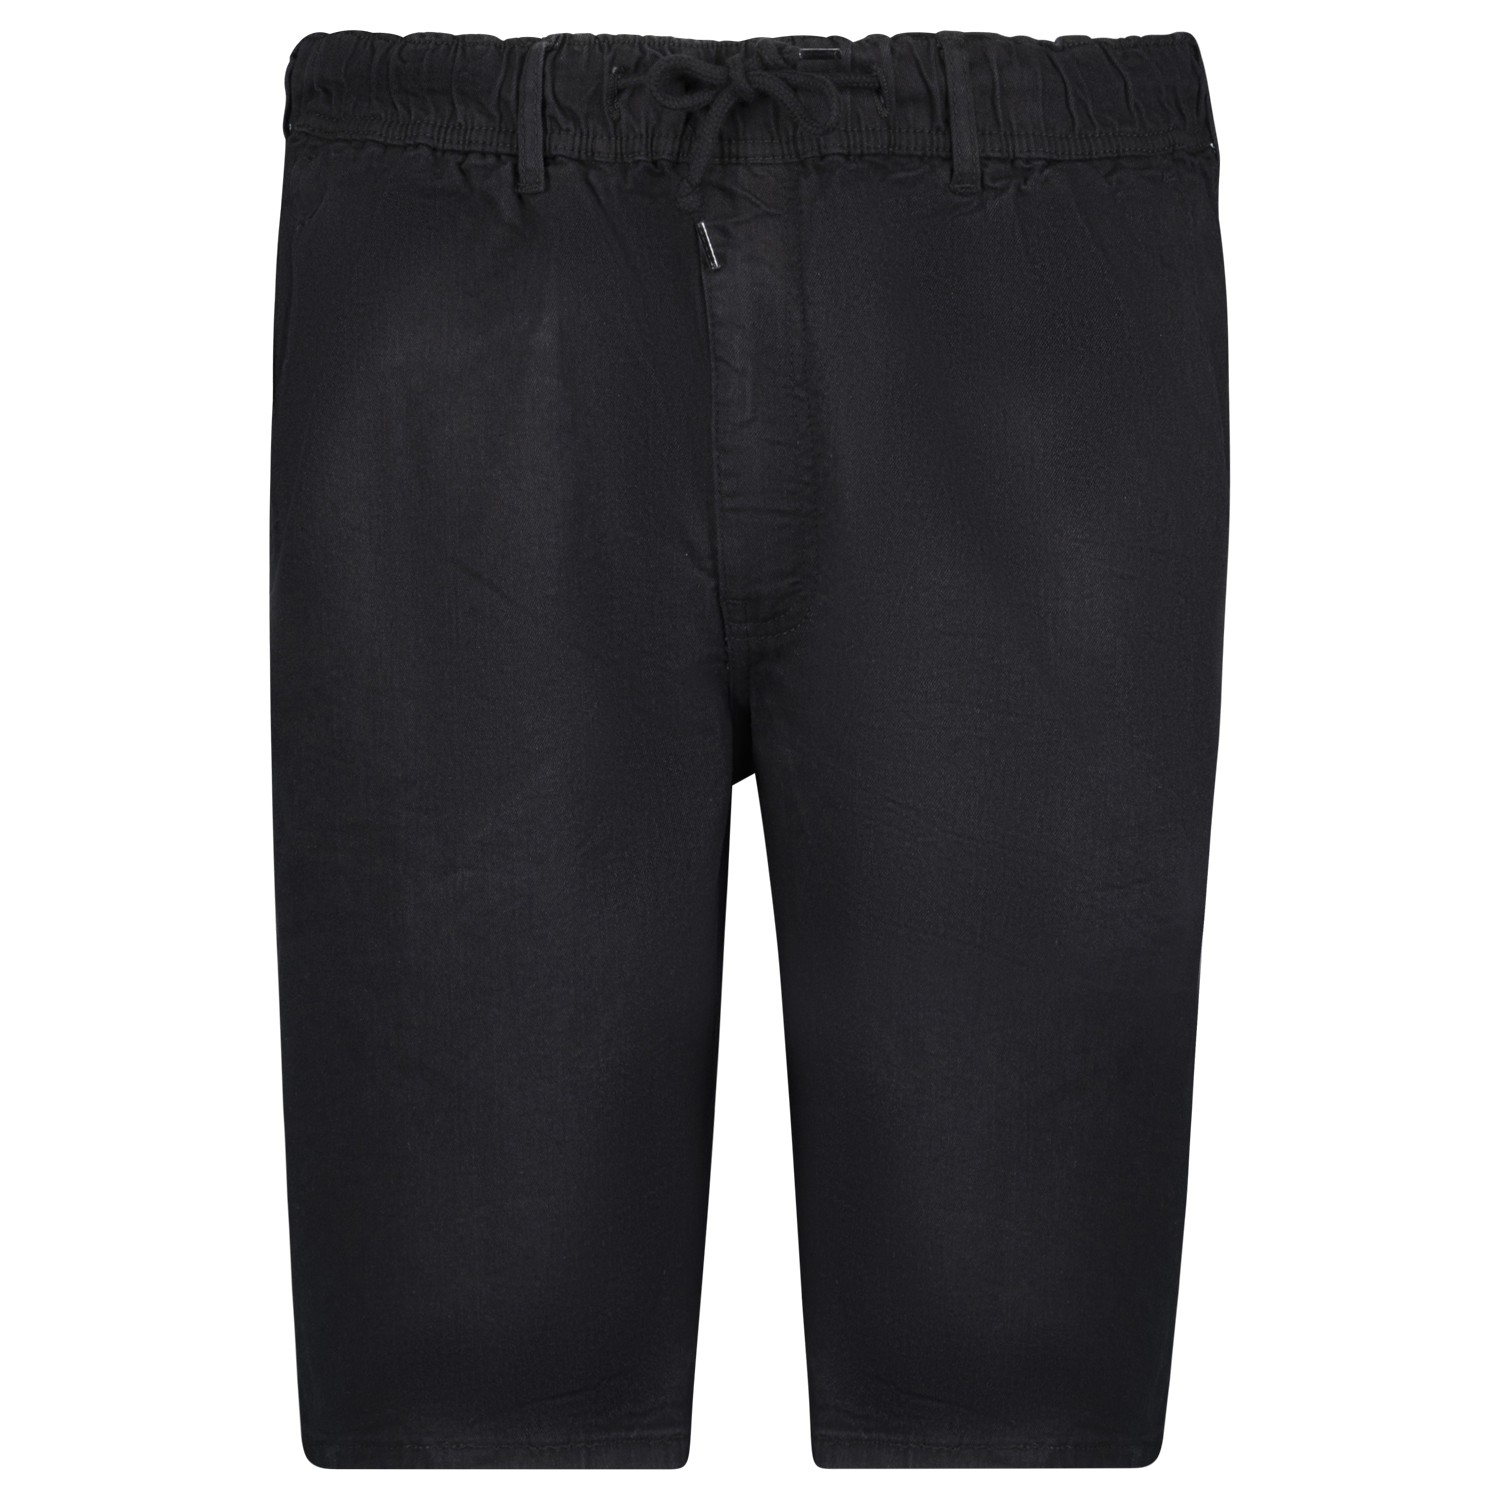 Jeans sweatpants short in black for men by Adamo series "Kansas" in oversizes up to 12XL